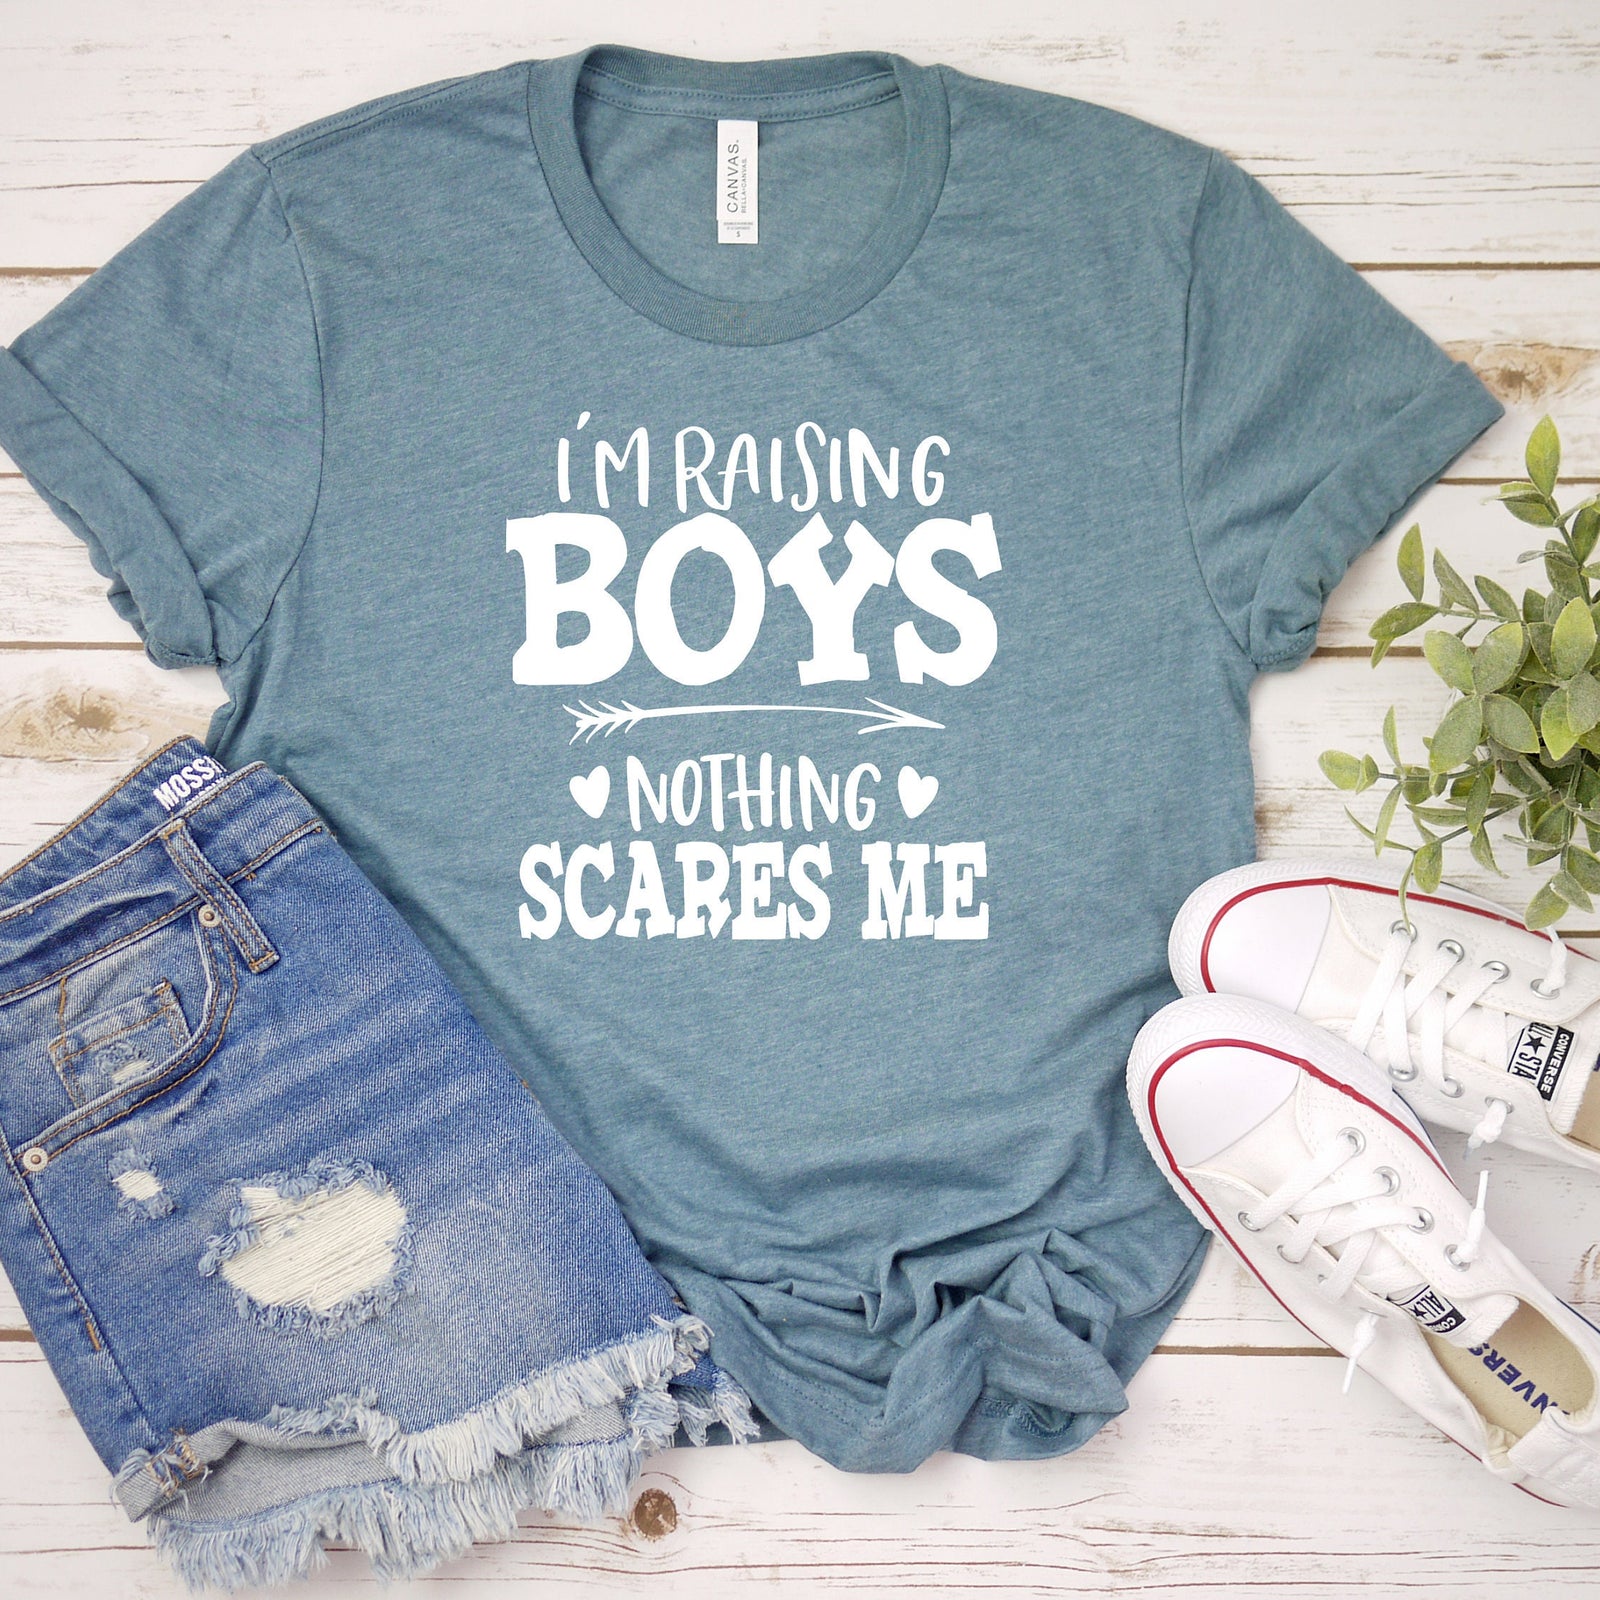 I'm Raising Boys Nothing Scares Me T Shirt - Mother's Day Gift Idea - Mom of Boys Shirt - Mom Statement Shirt